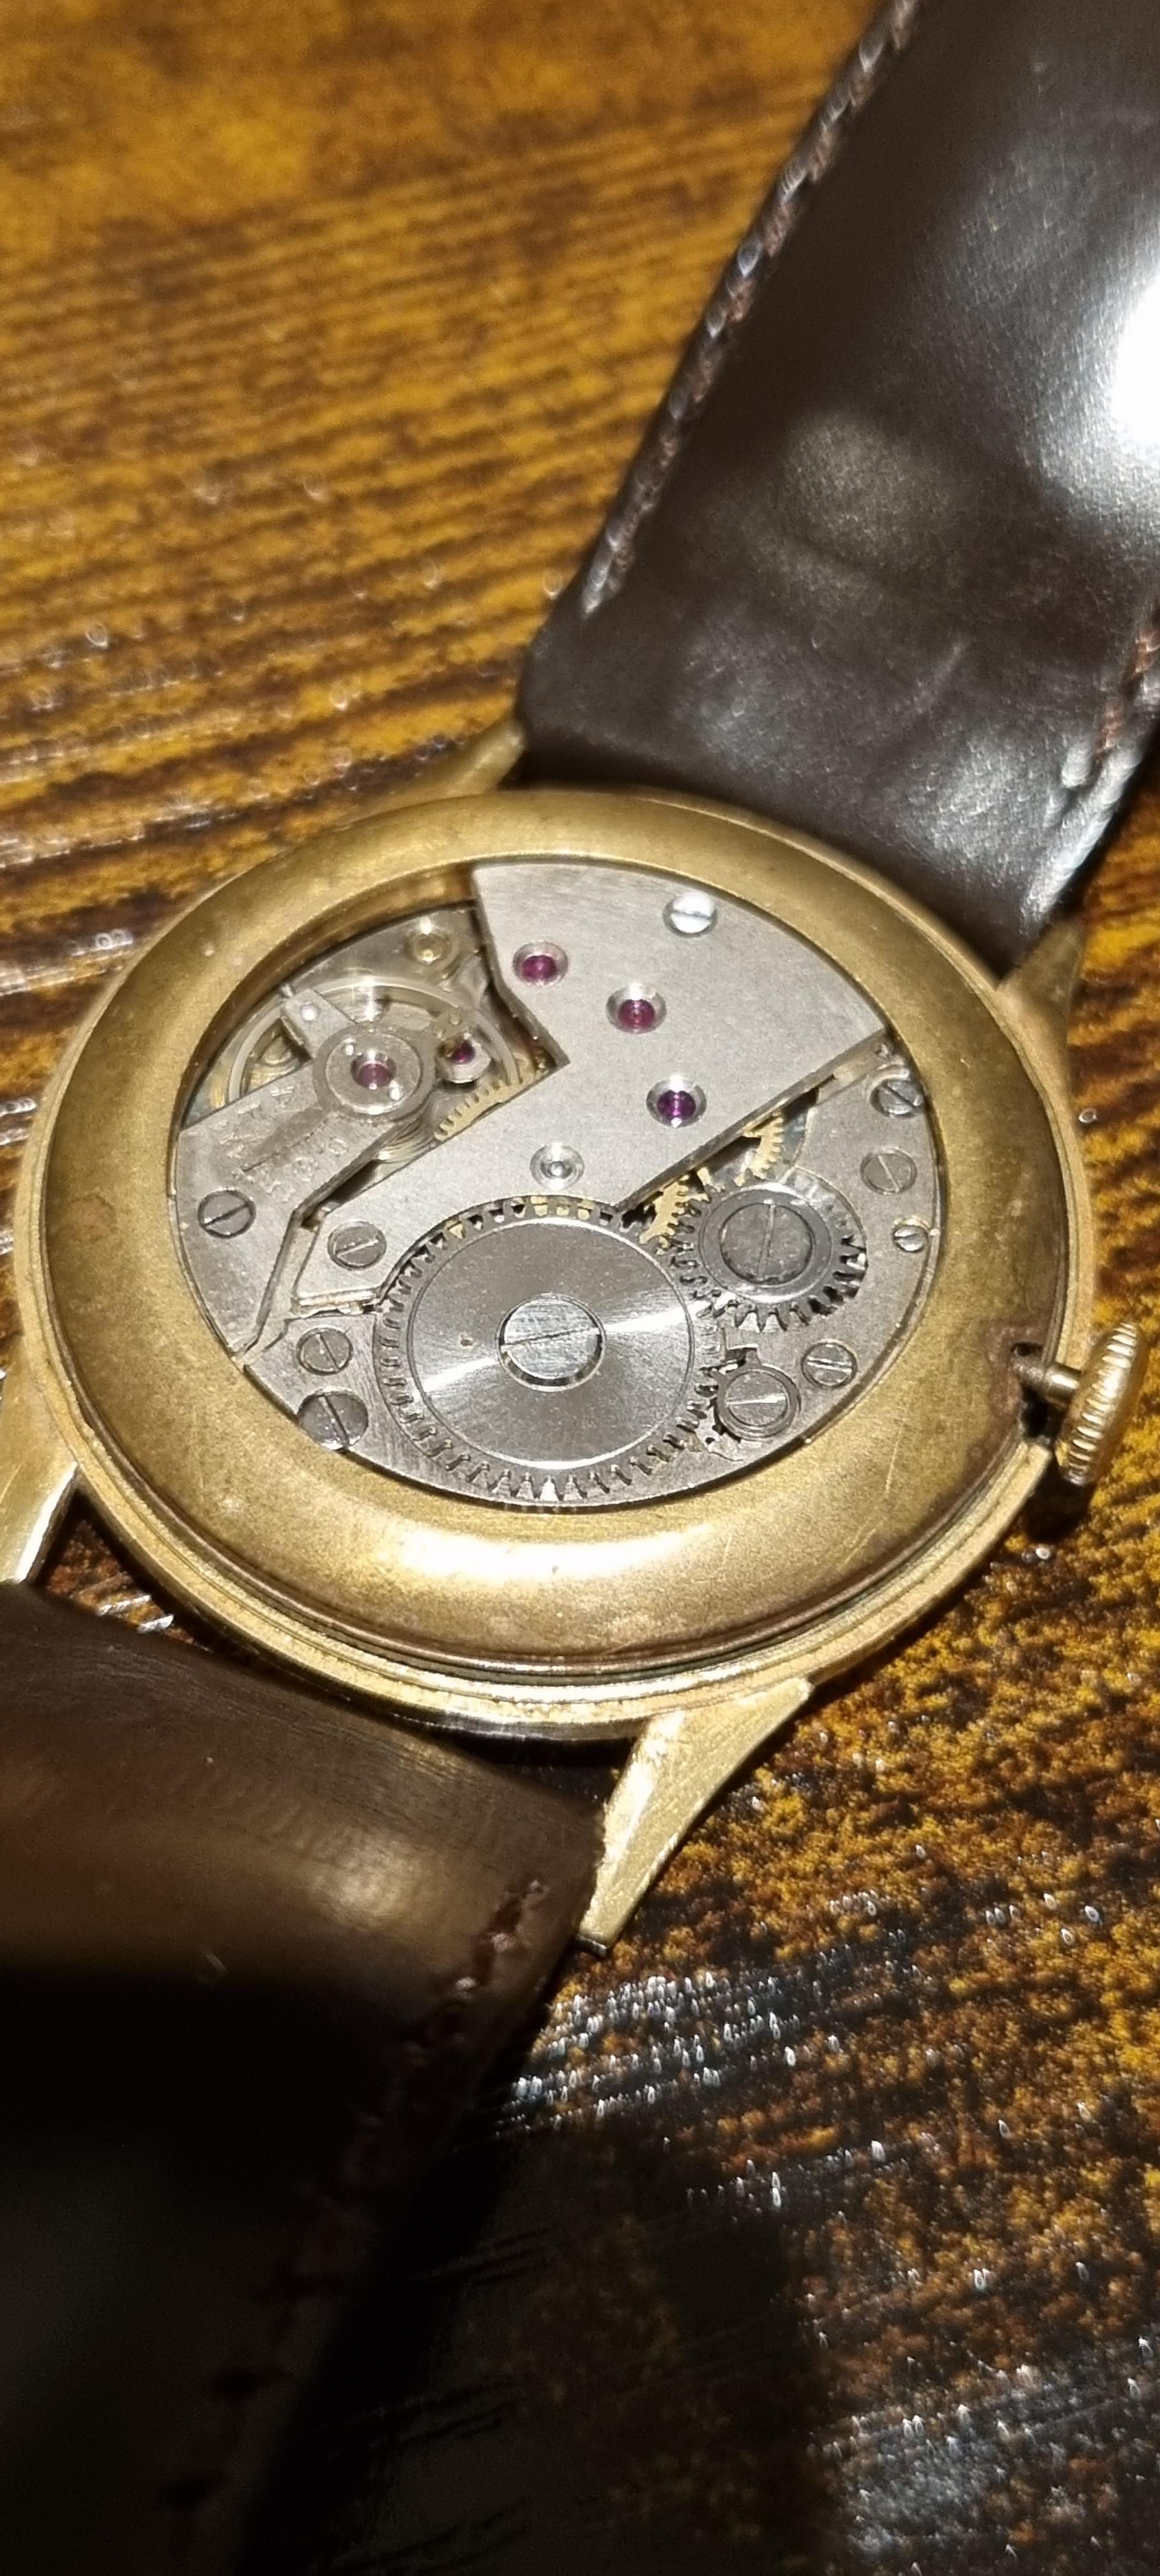 Mystery R.H Watch - Identify This Movement or Watch - Watch Repair Talk